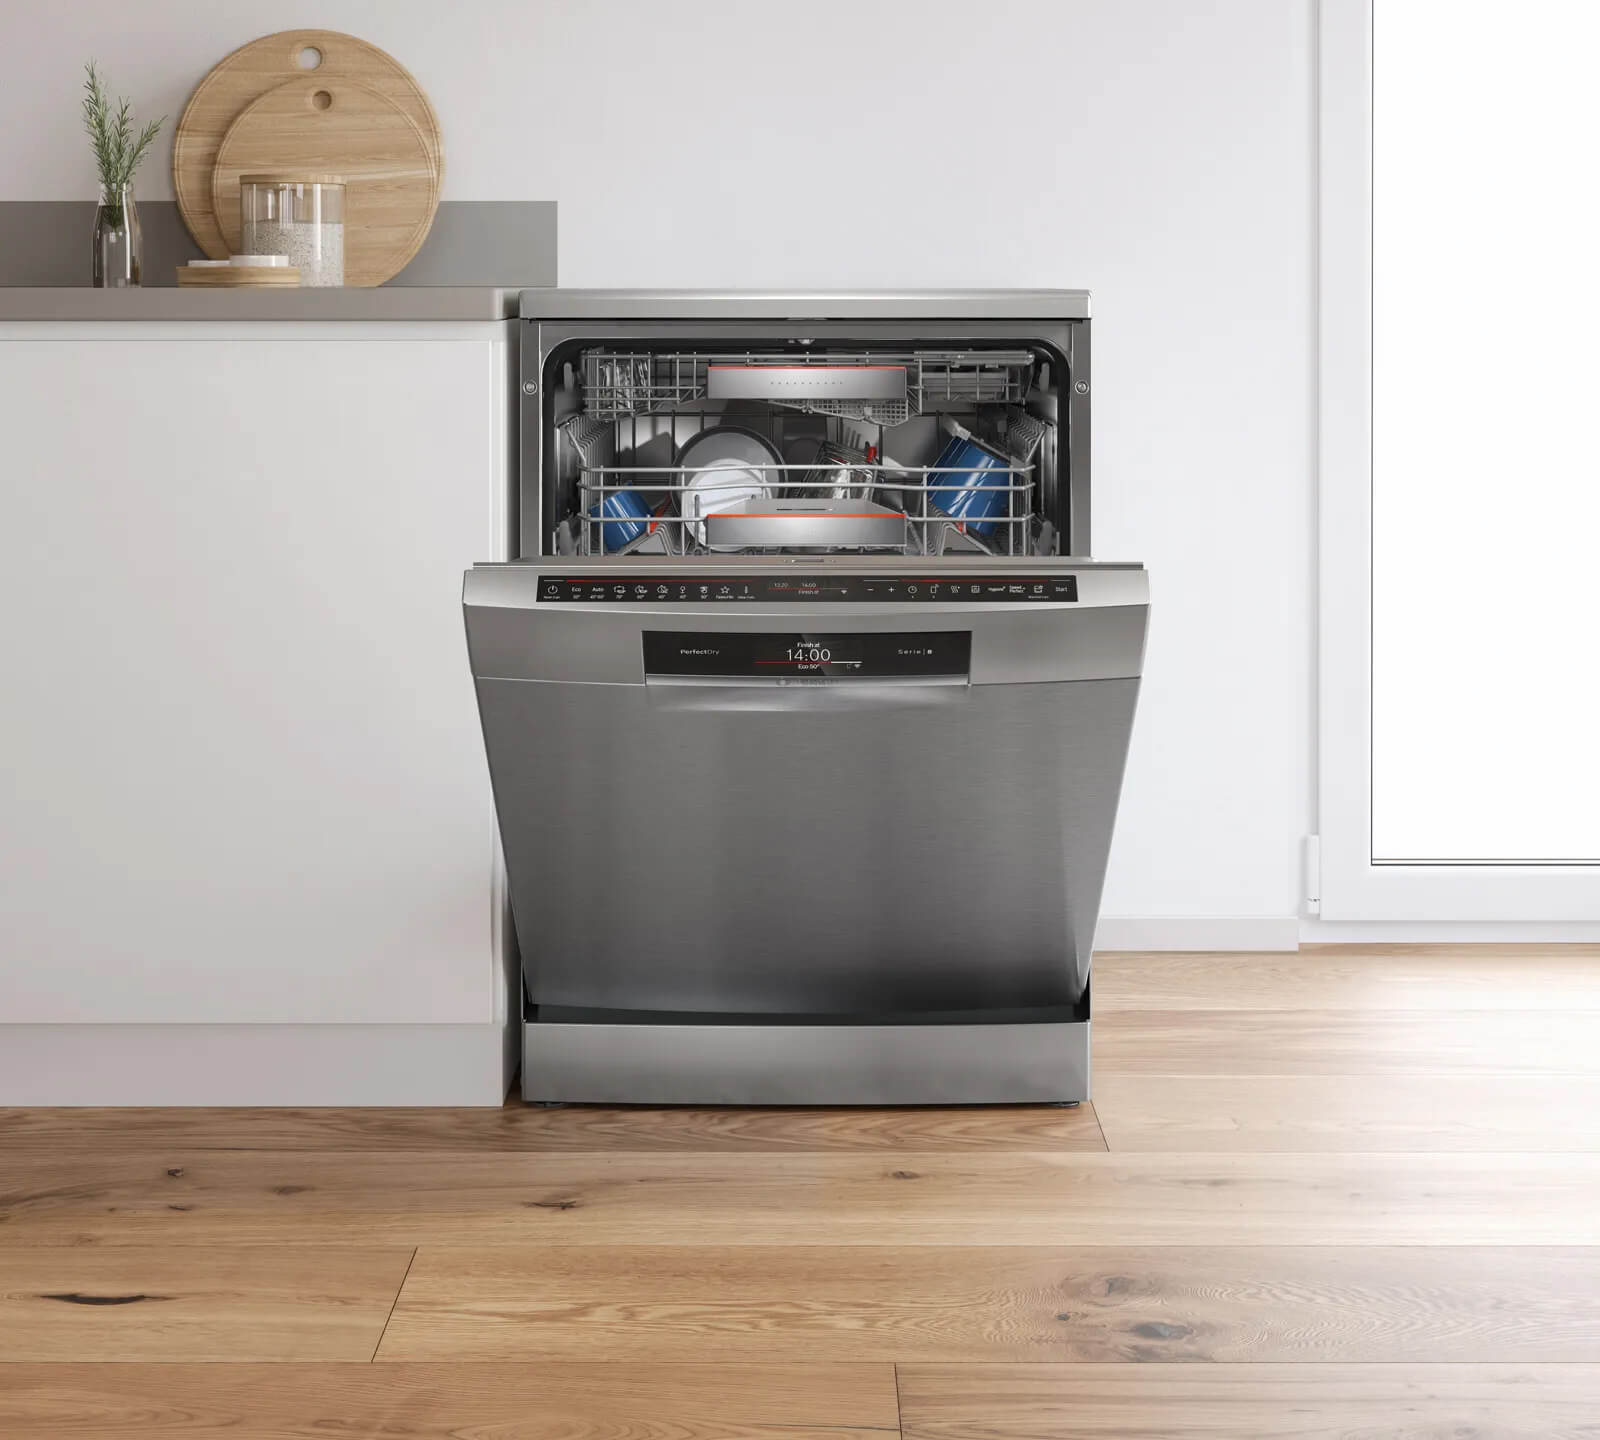 Bosch Series 8 Free-standing dishwasher in a home showcasing smart appliance convenience and elegant design in a modern kitchen setting